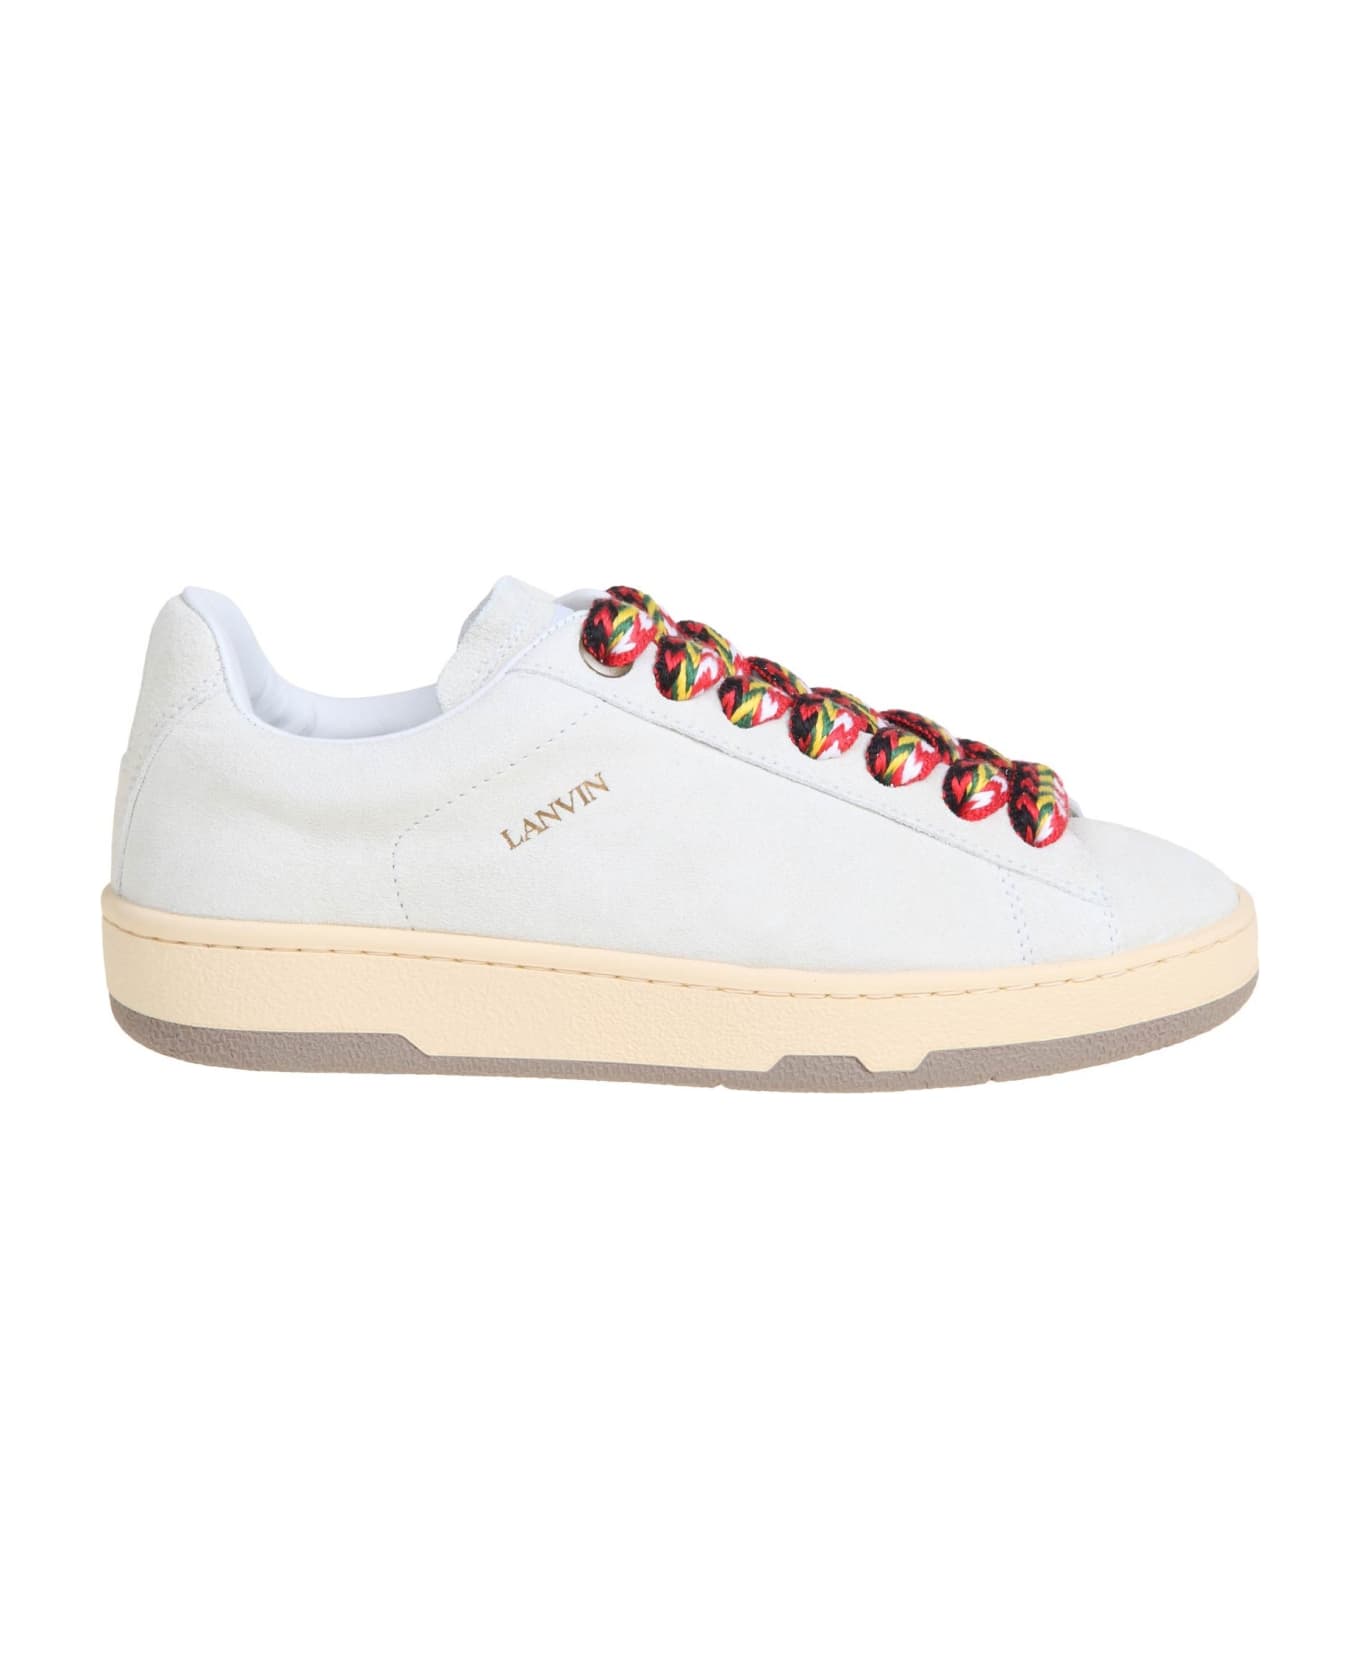 Lanvin Lite Curb Sneakers In Leather Color White - White